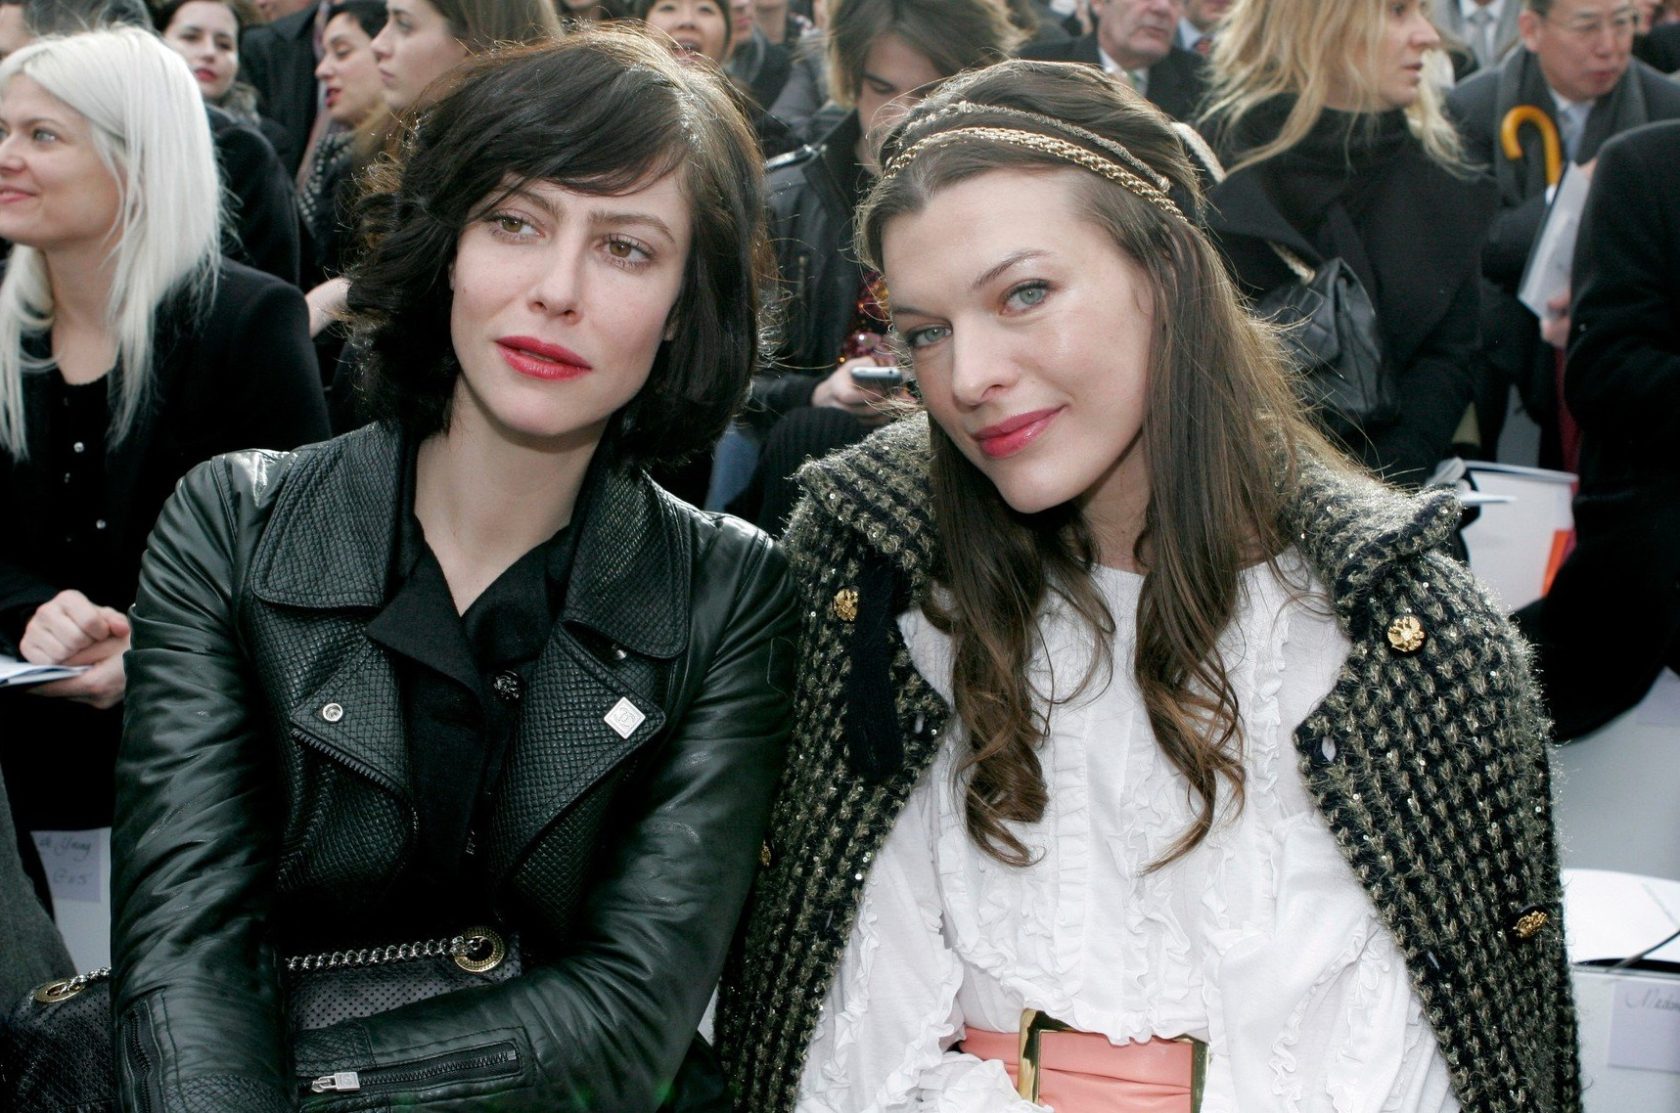 D 98445-11 Anna Mouglalis and Milla Jovovich . . Actress Anna Mouglalis and Model Milla Jovovich (right) at the Chanel Paris Autum Winter 2009/10 show as part of Paris Fashion Week, France, 10/03/2009., Image: 220298498, License: Rights-managed, Restrictions: , Model Release: no, Credit line: Profimedia, TEMP Camerapress